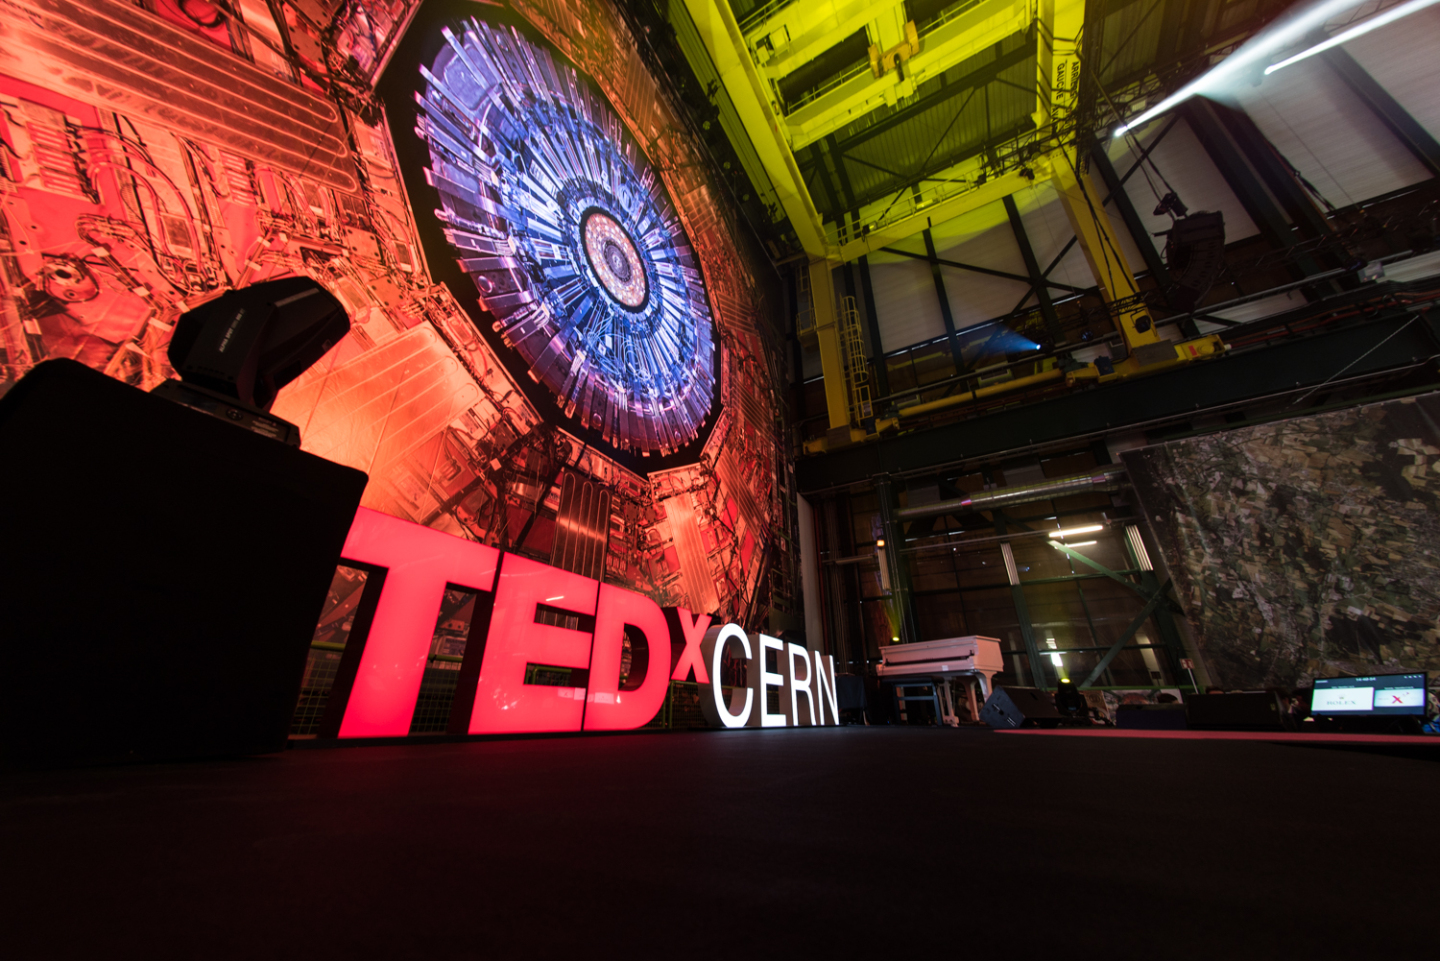 Want to make a splash? TEDxCERN needs you